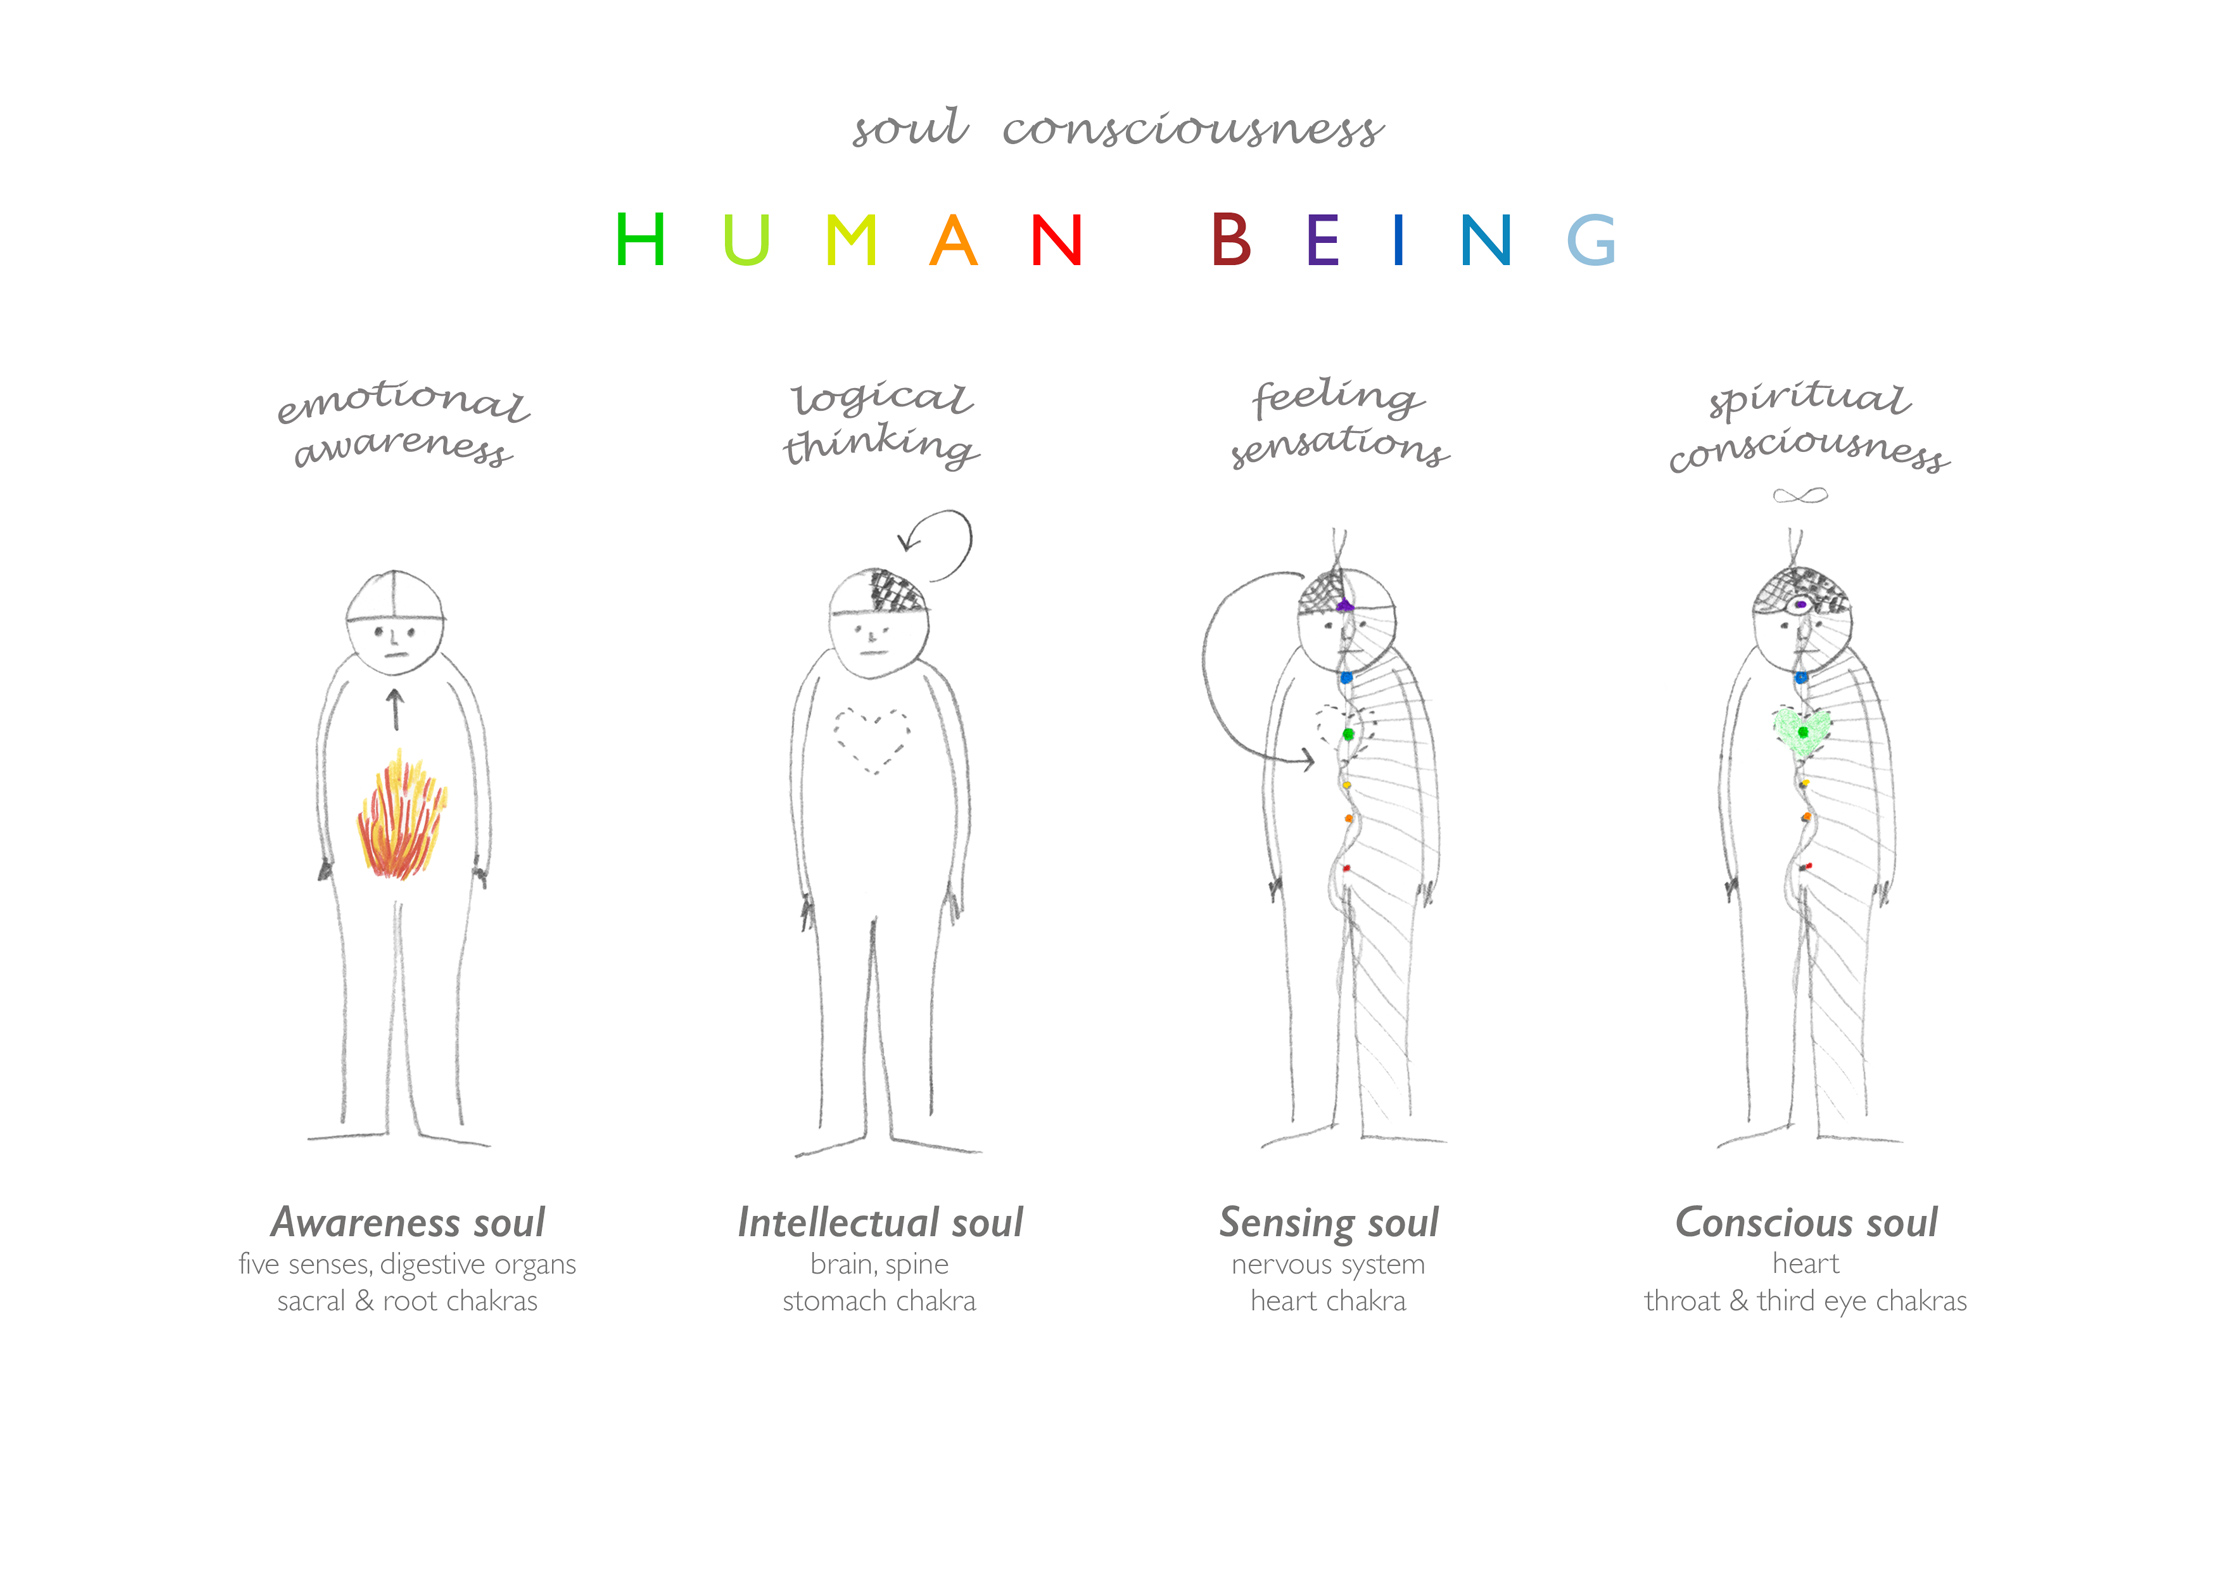 Human Being | soul consciousness